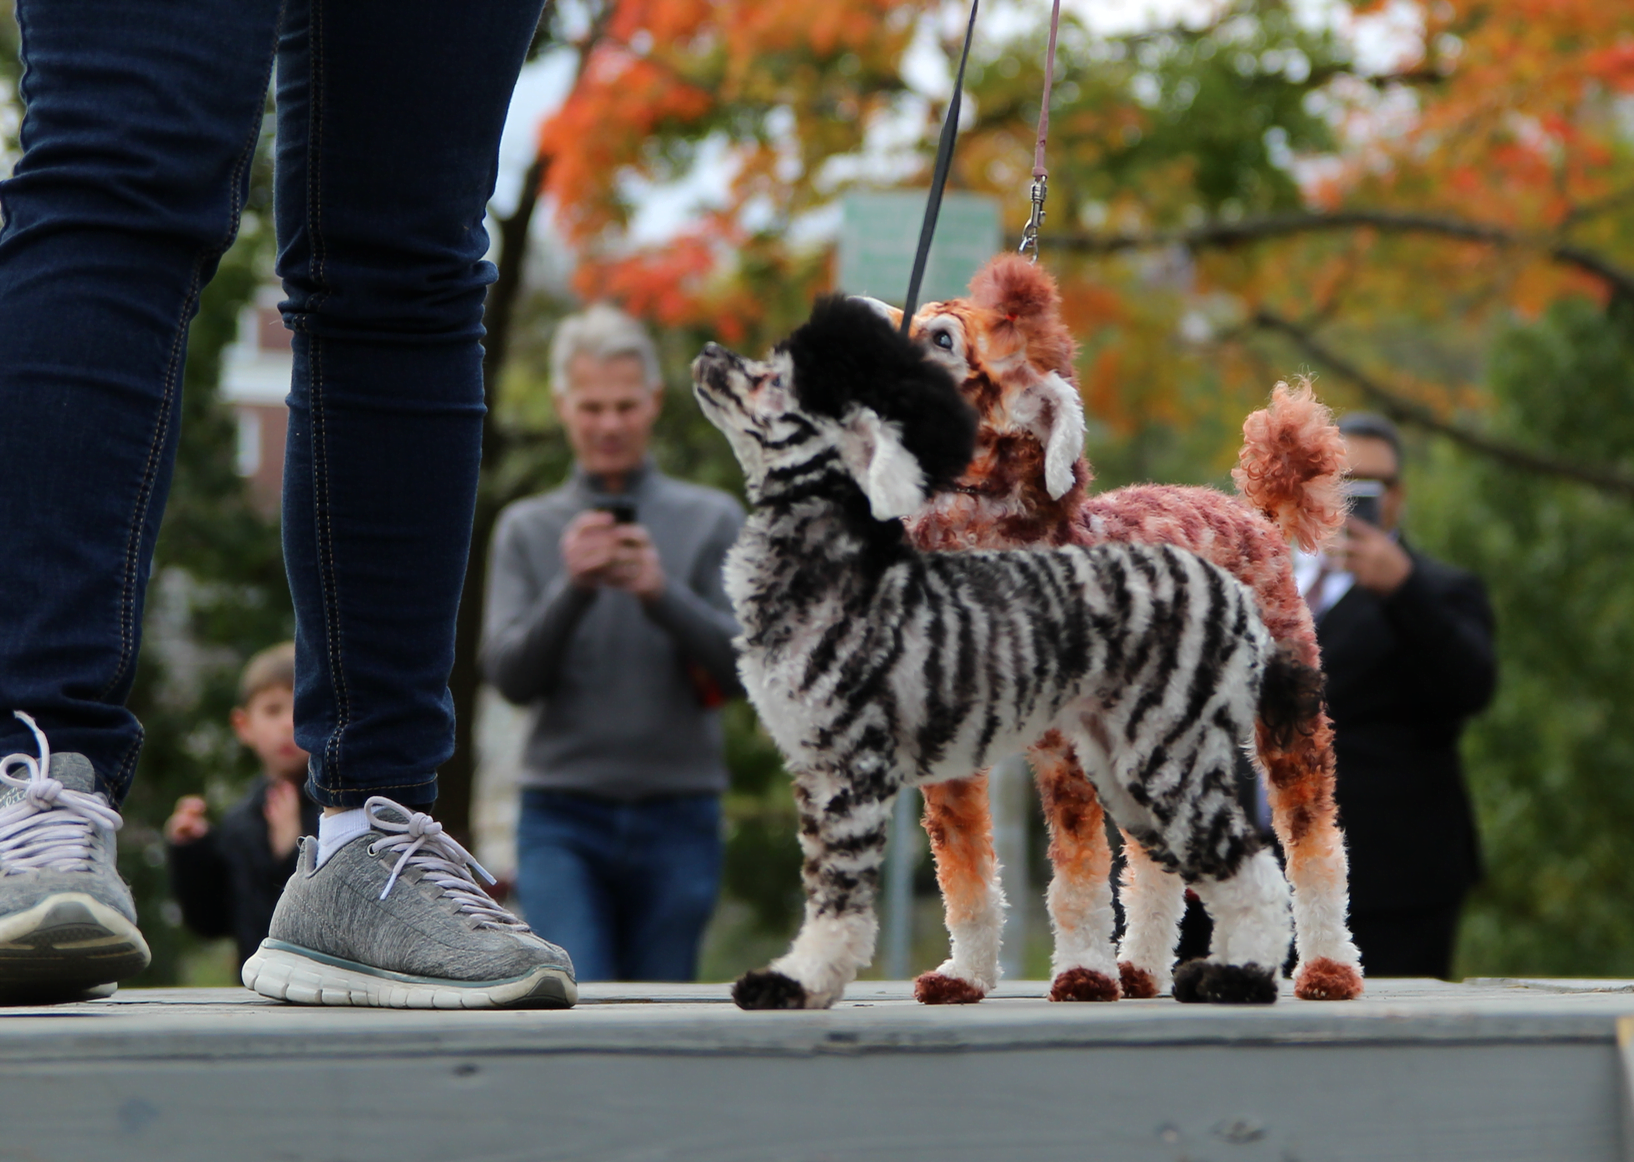 Toy poodles Lady Gaga and Tilly, dressed as a giraffe and zebra for Pet Pantry's Howl & Prowl to benefit Adopt A Dog. Oct 28, 2018 Photo: Leslie Yager